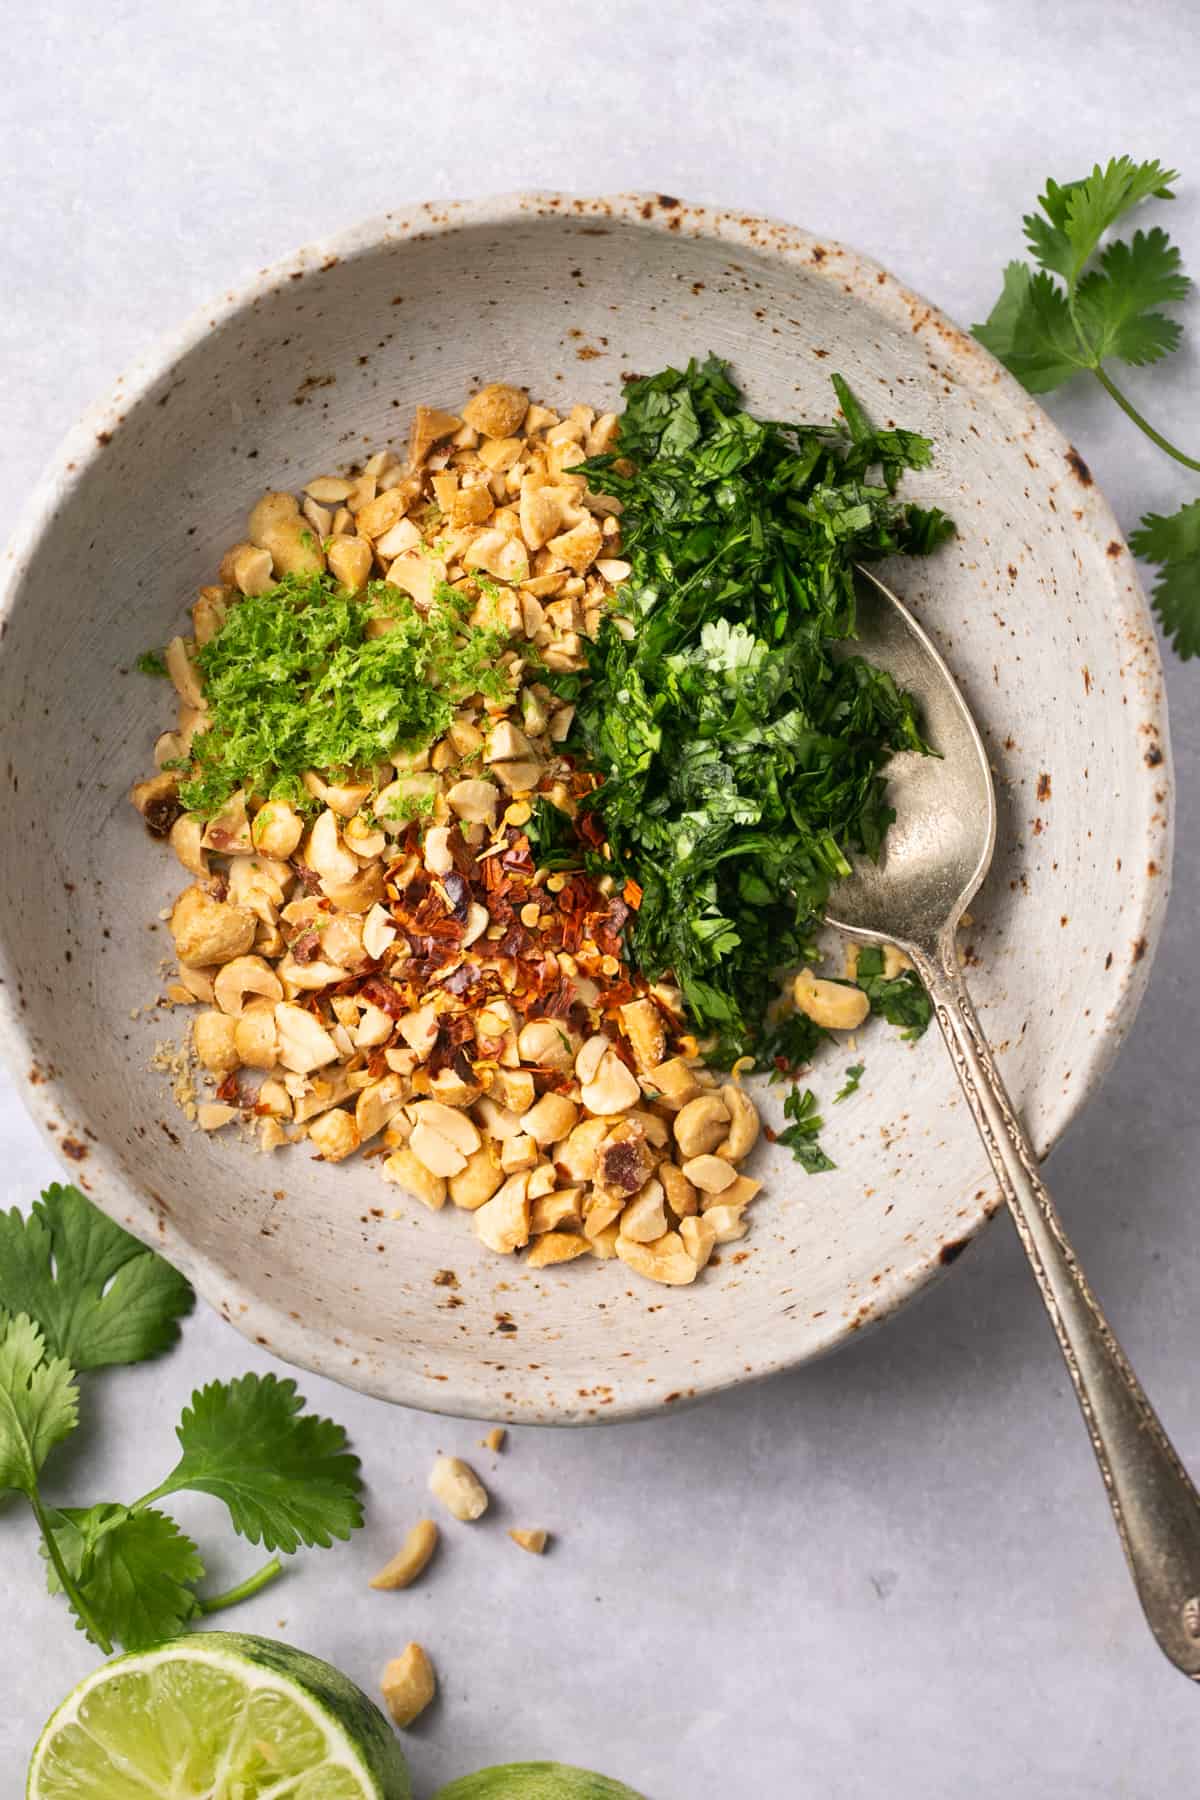 peanuts with cilantro and red pepper flakes in a bowl